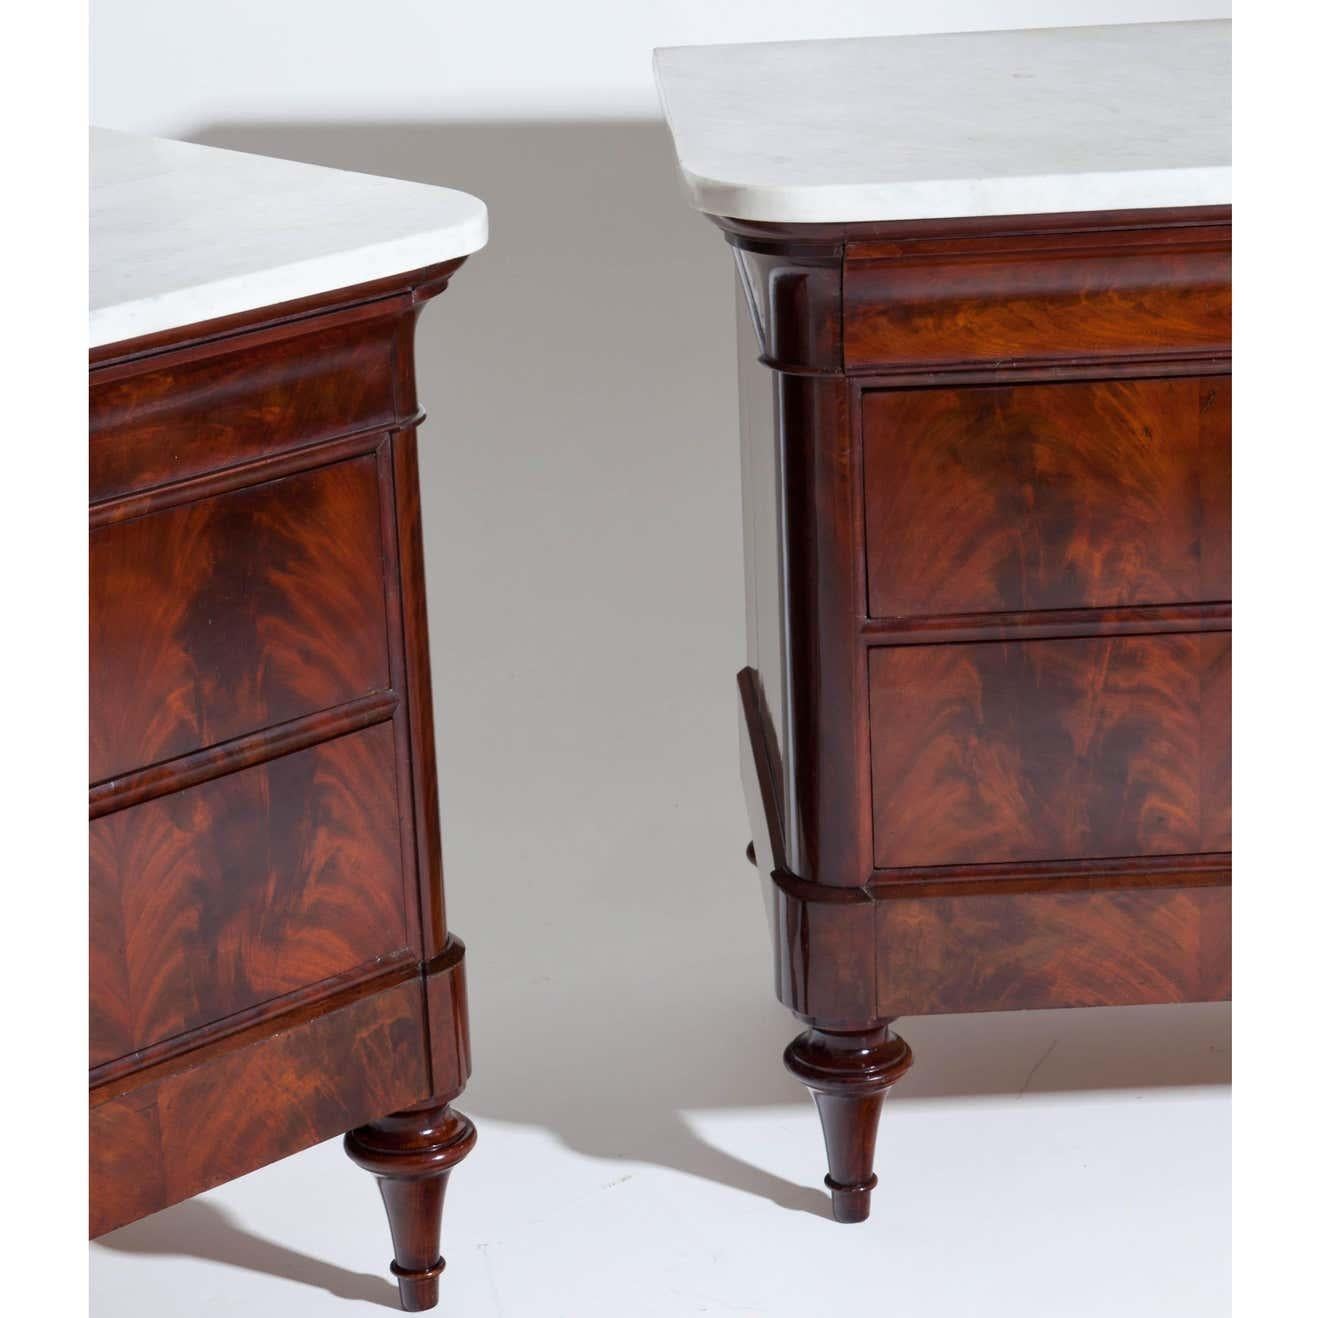 Pair of Louis Philippe chests of drawers on conical feet. The body with rounded corners and three drawers with flamed mahogany veneer and slightly protruding cornice. The tops are white marble.
Details
Dimensions
Height: 32.68 in. (83 cm)
Width: